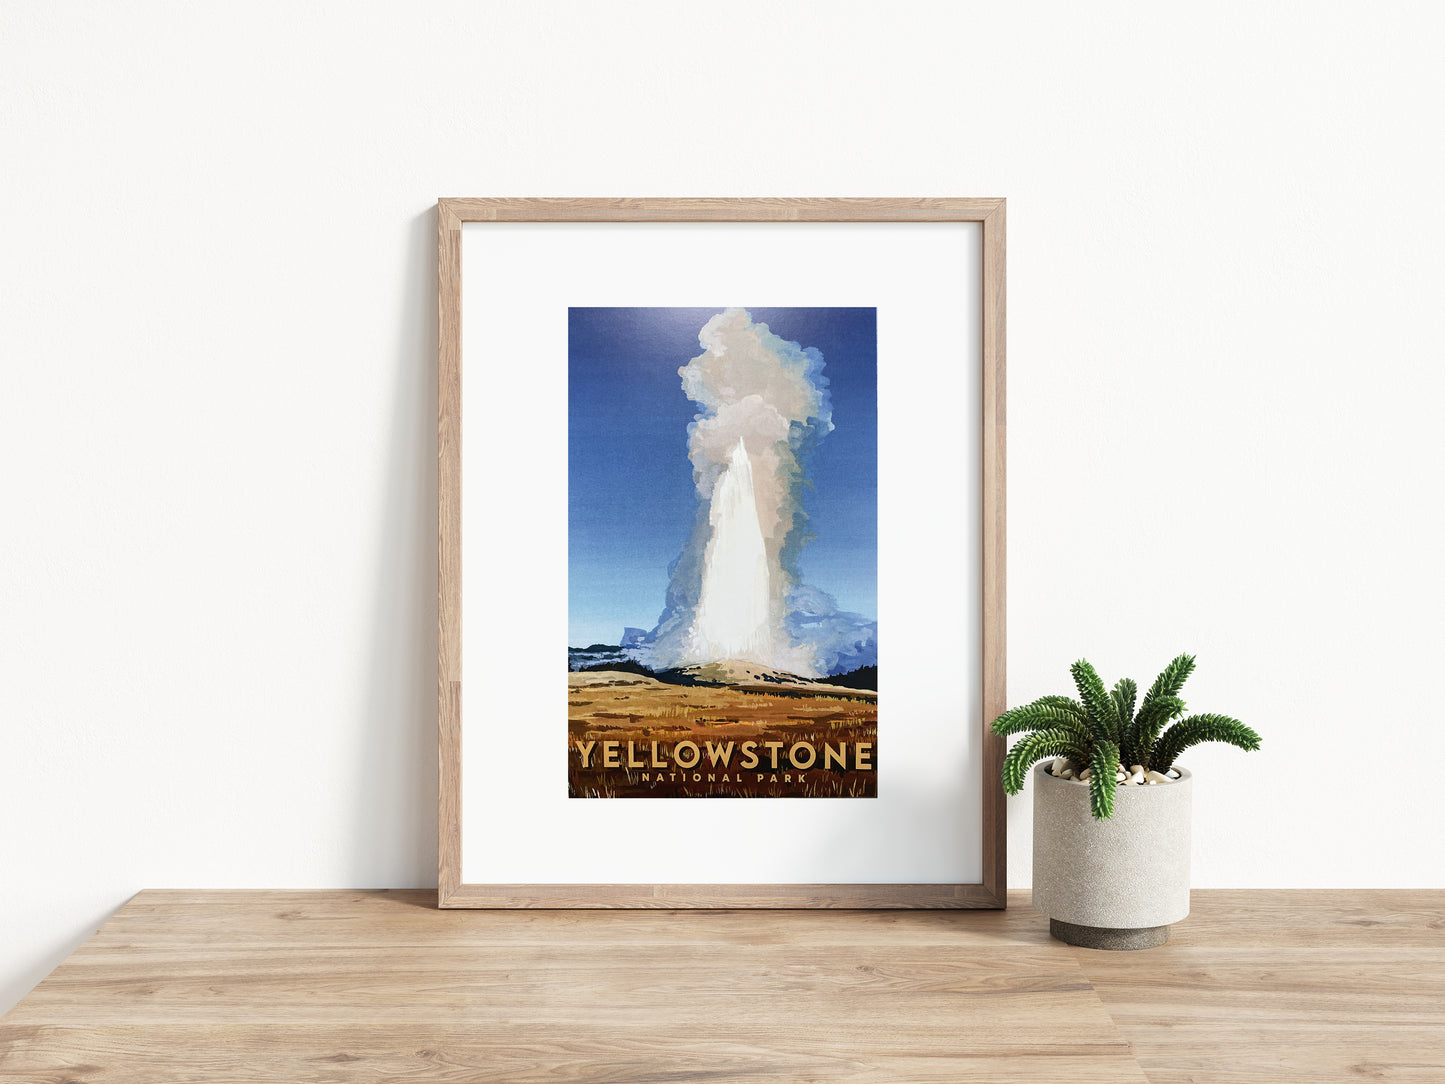 'Yellowstone' National Park Travel Poster